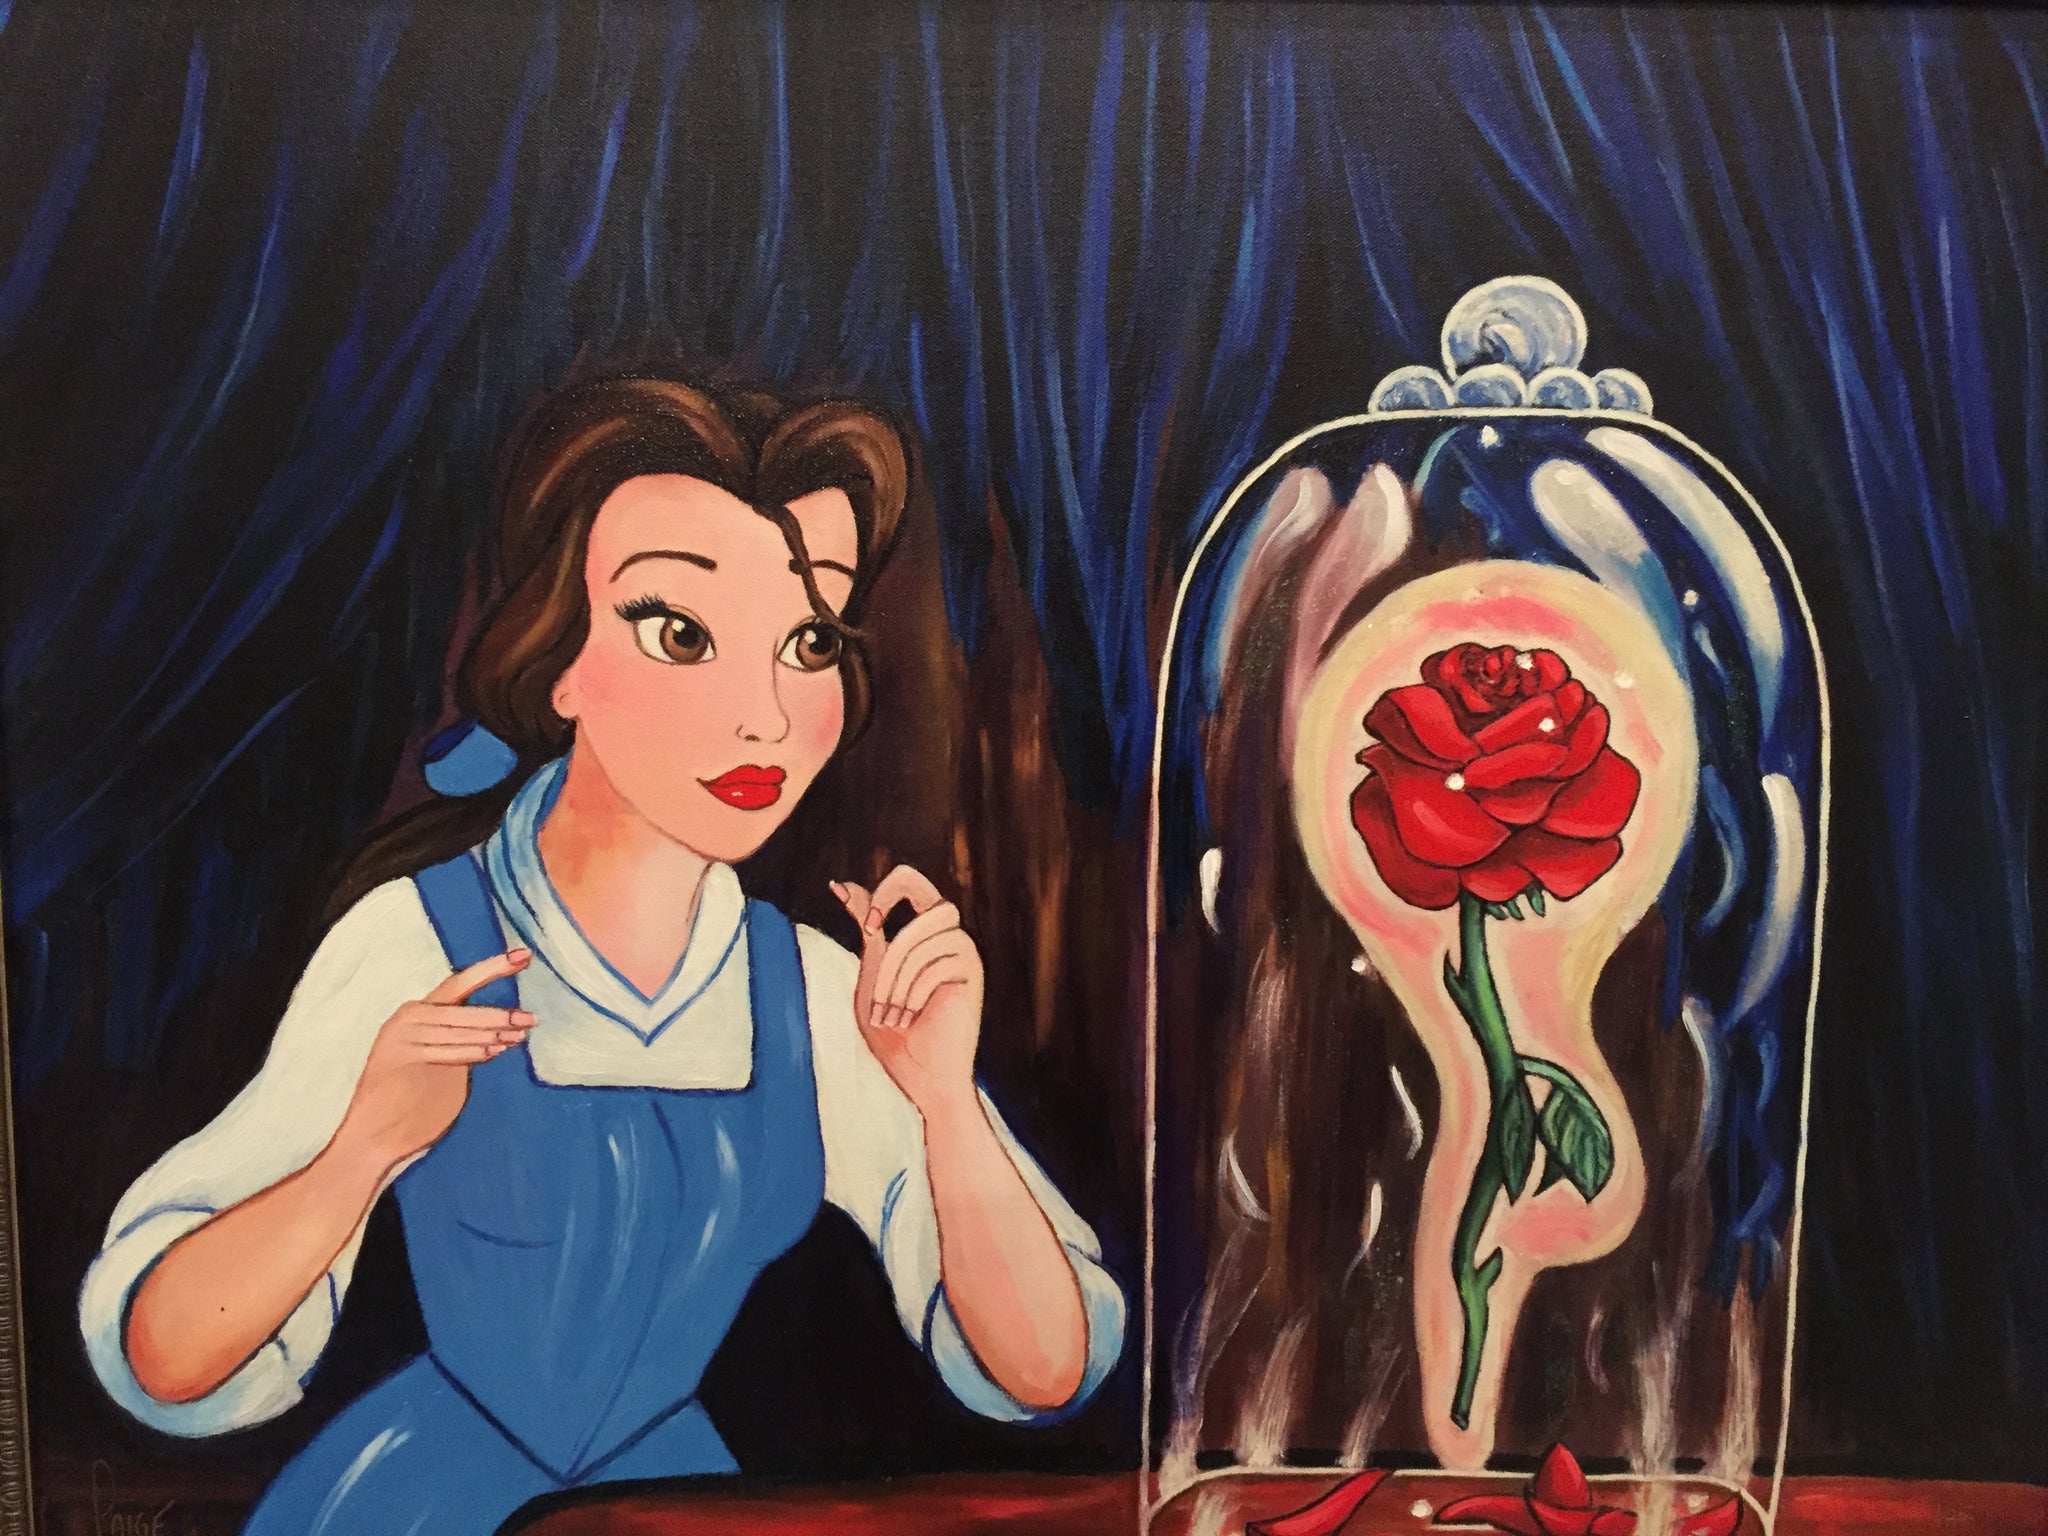 Fallen Petals by Paige O'Hara inspired by Beauty and the Beast